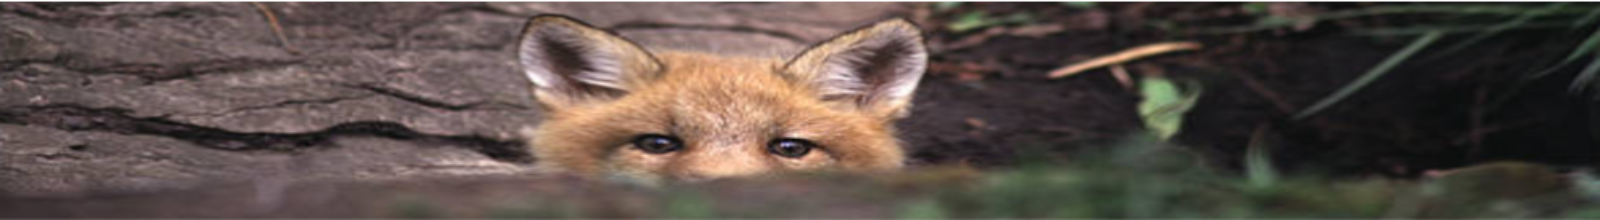 Fox peeking over a log with a rock face in the background